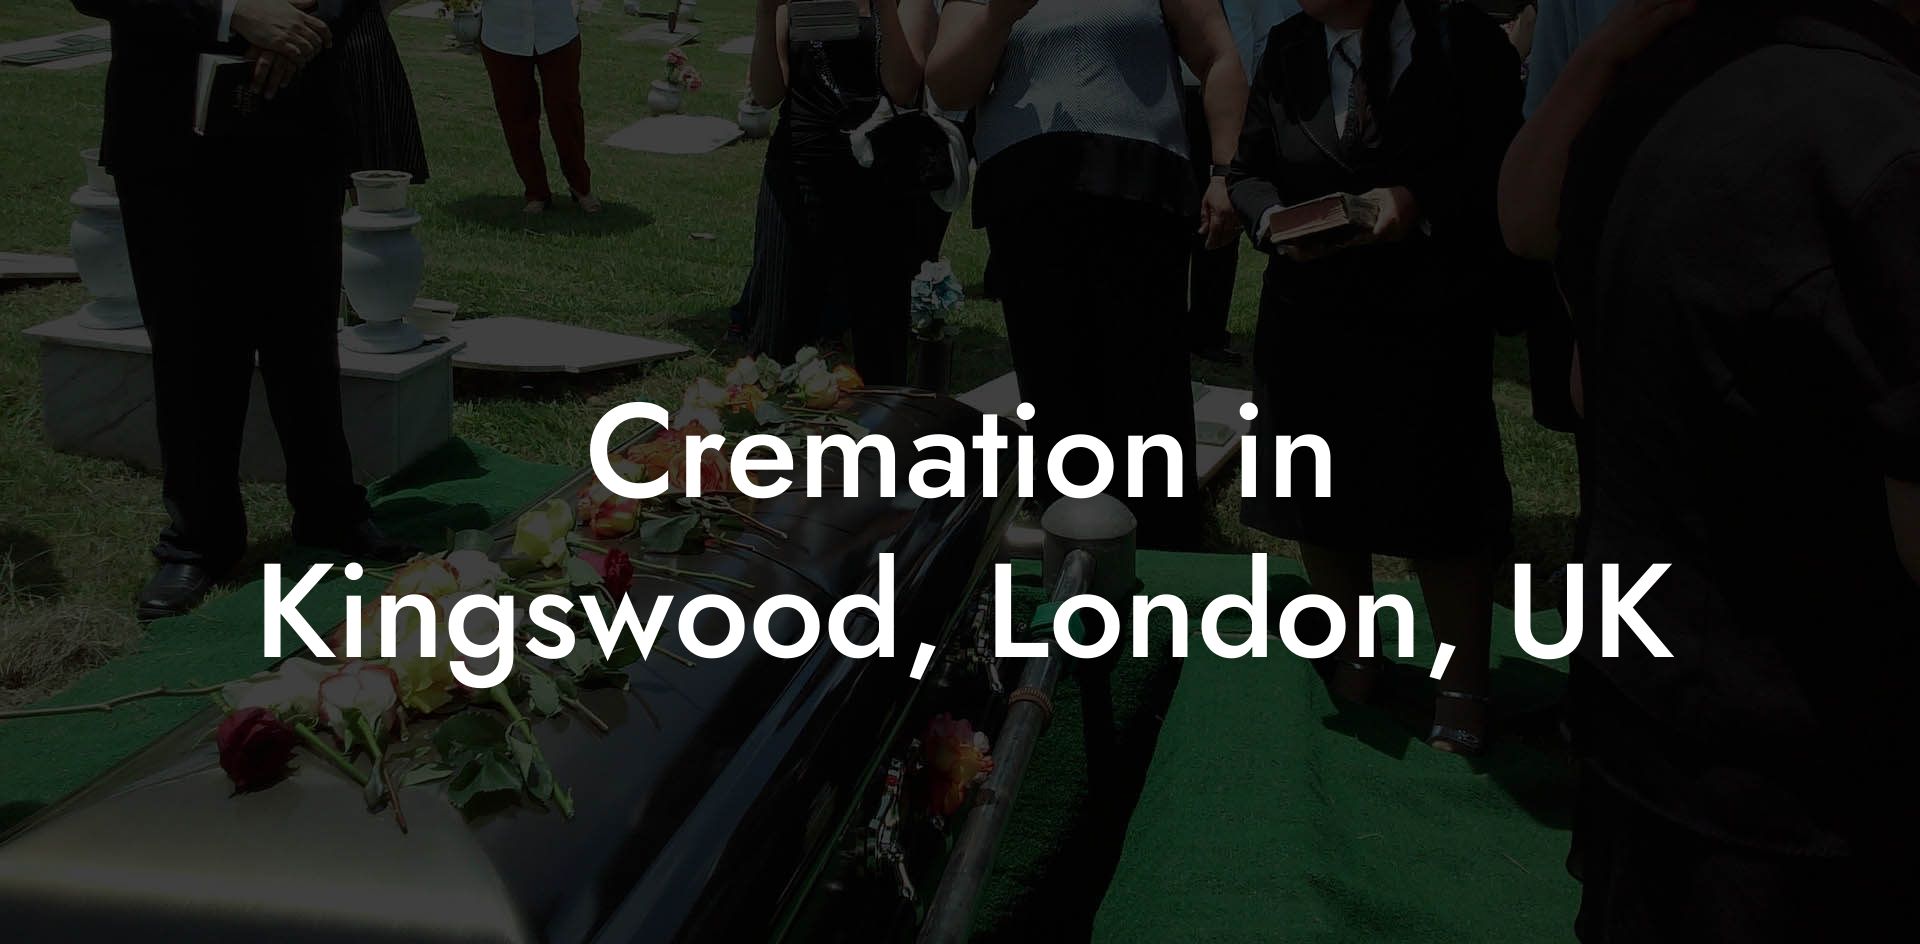 Cremation in Kingswood, London, UK